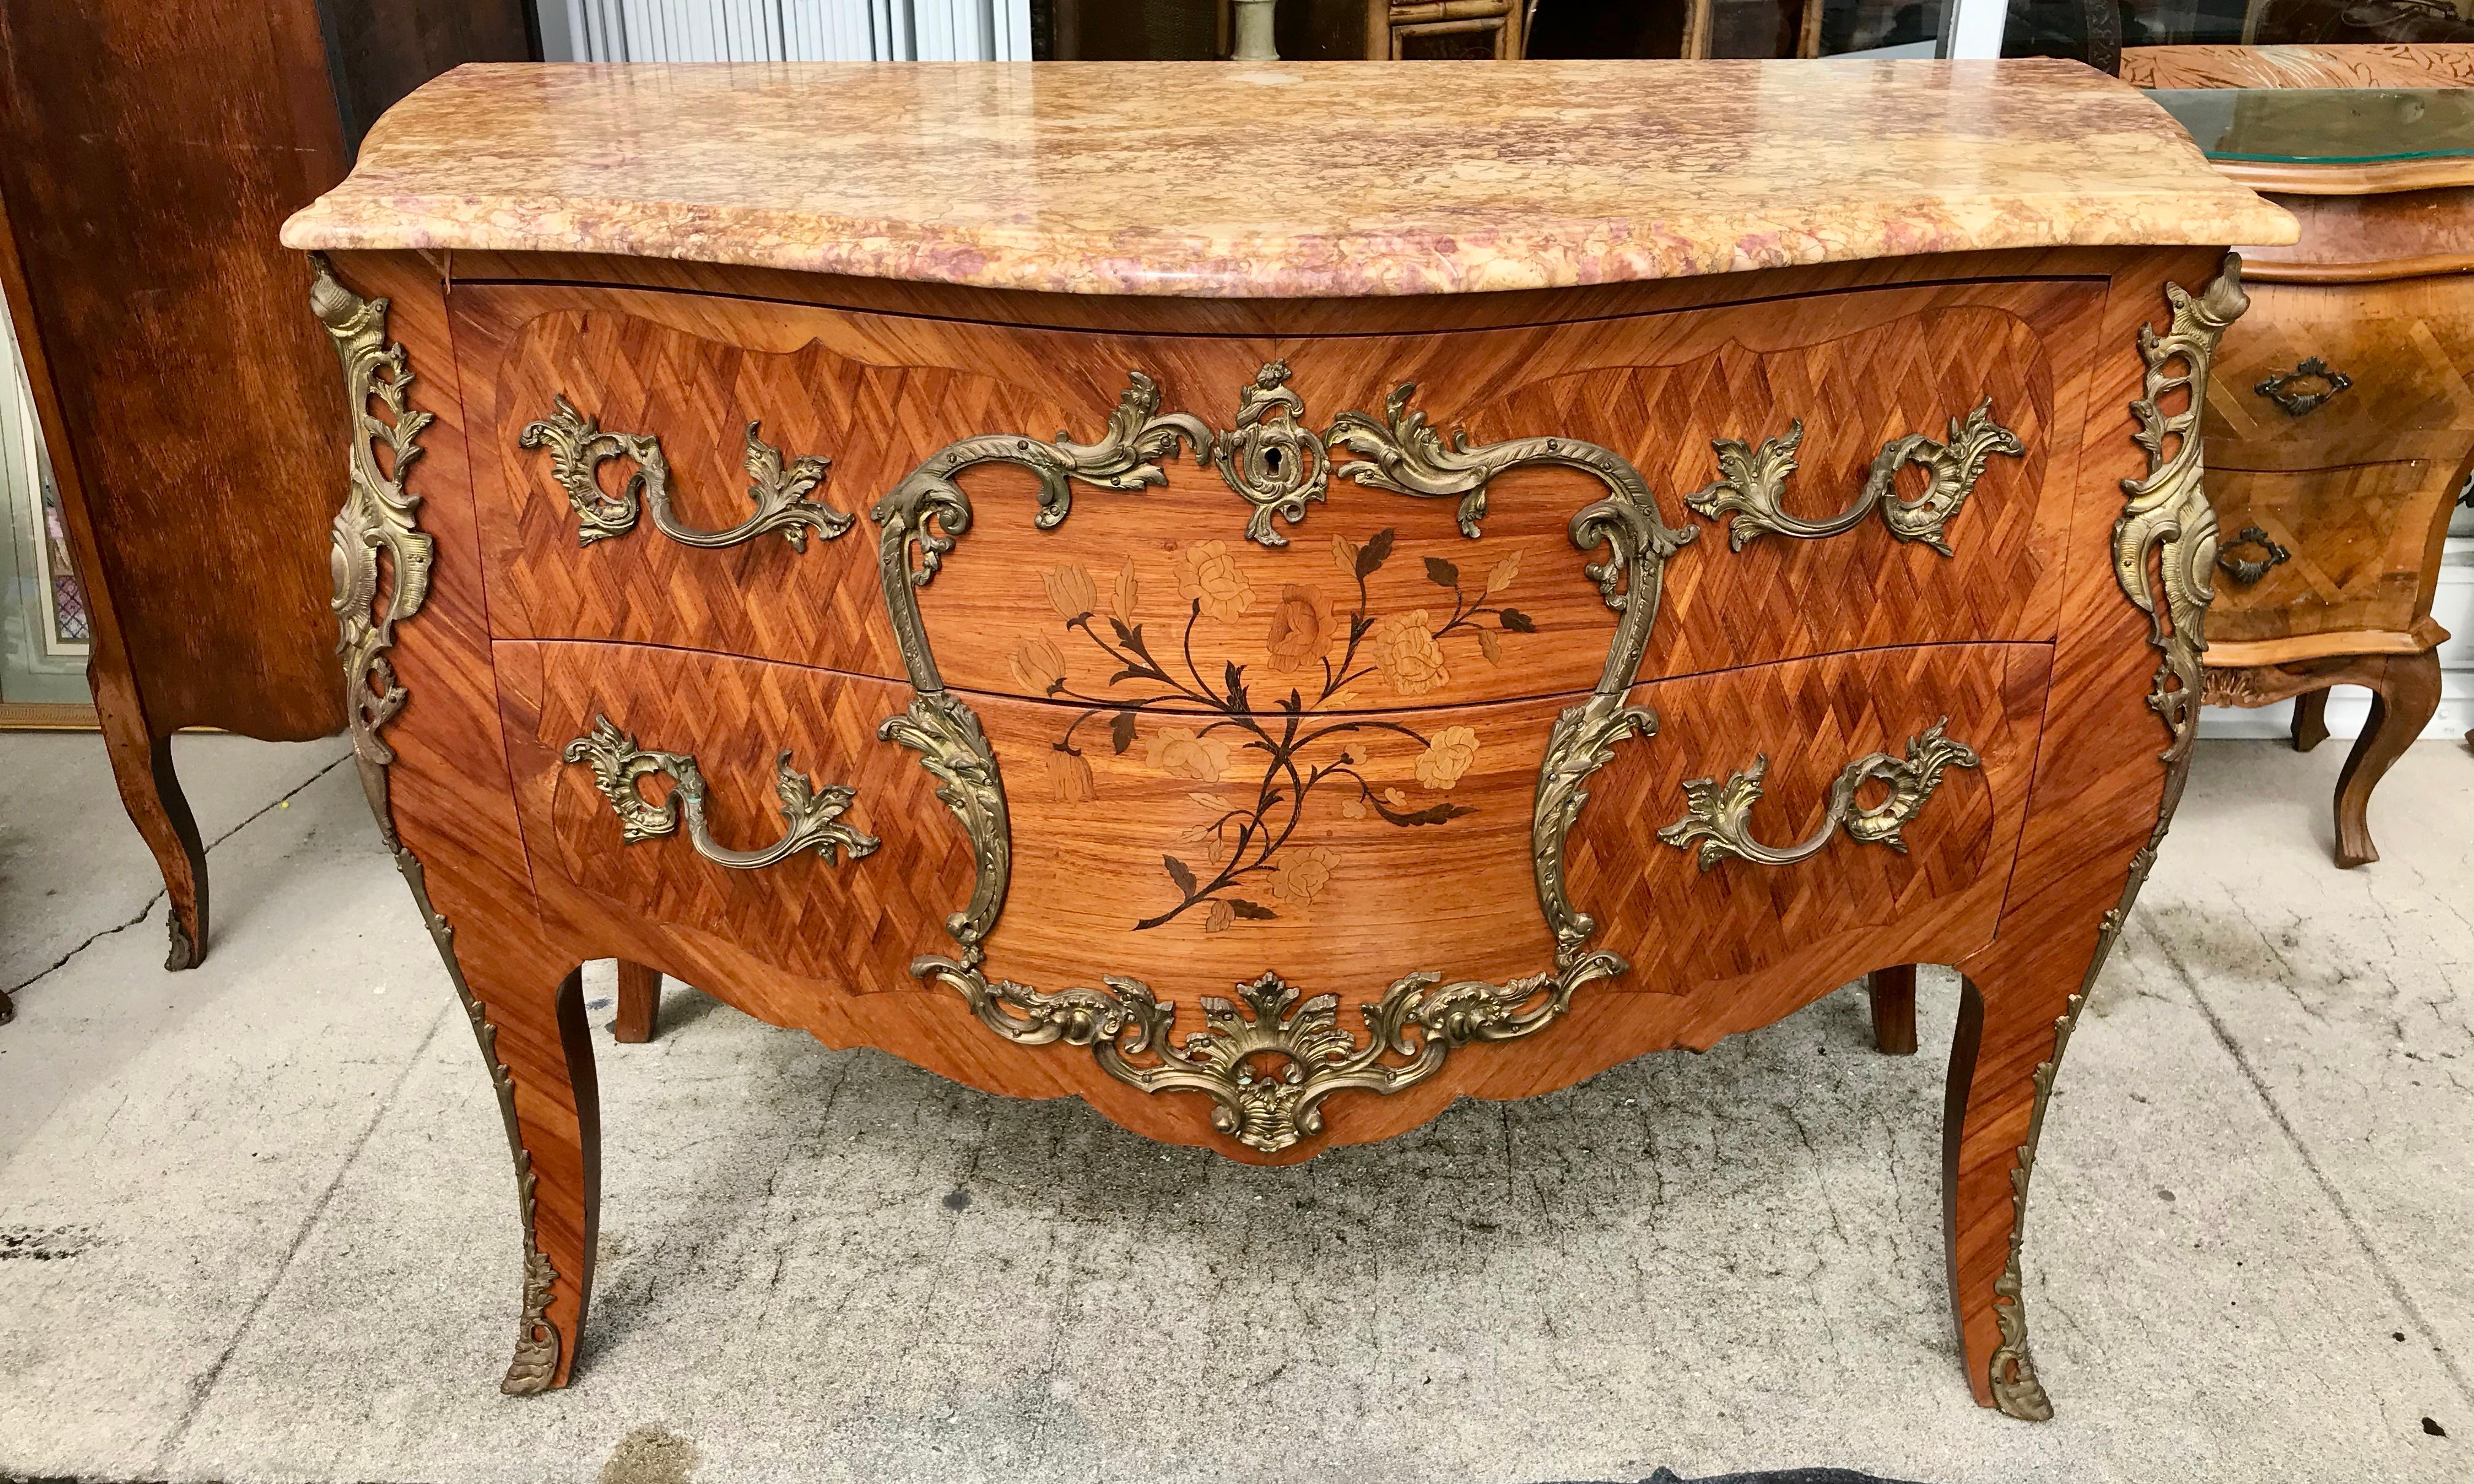 Generously scaled with exceptional and extensive marquetry inlays.
The bronze mounts are elaborate. Beautiful quality and workmanship.
The commode is fitted with a fine marble top.